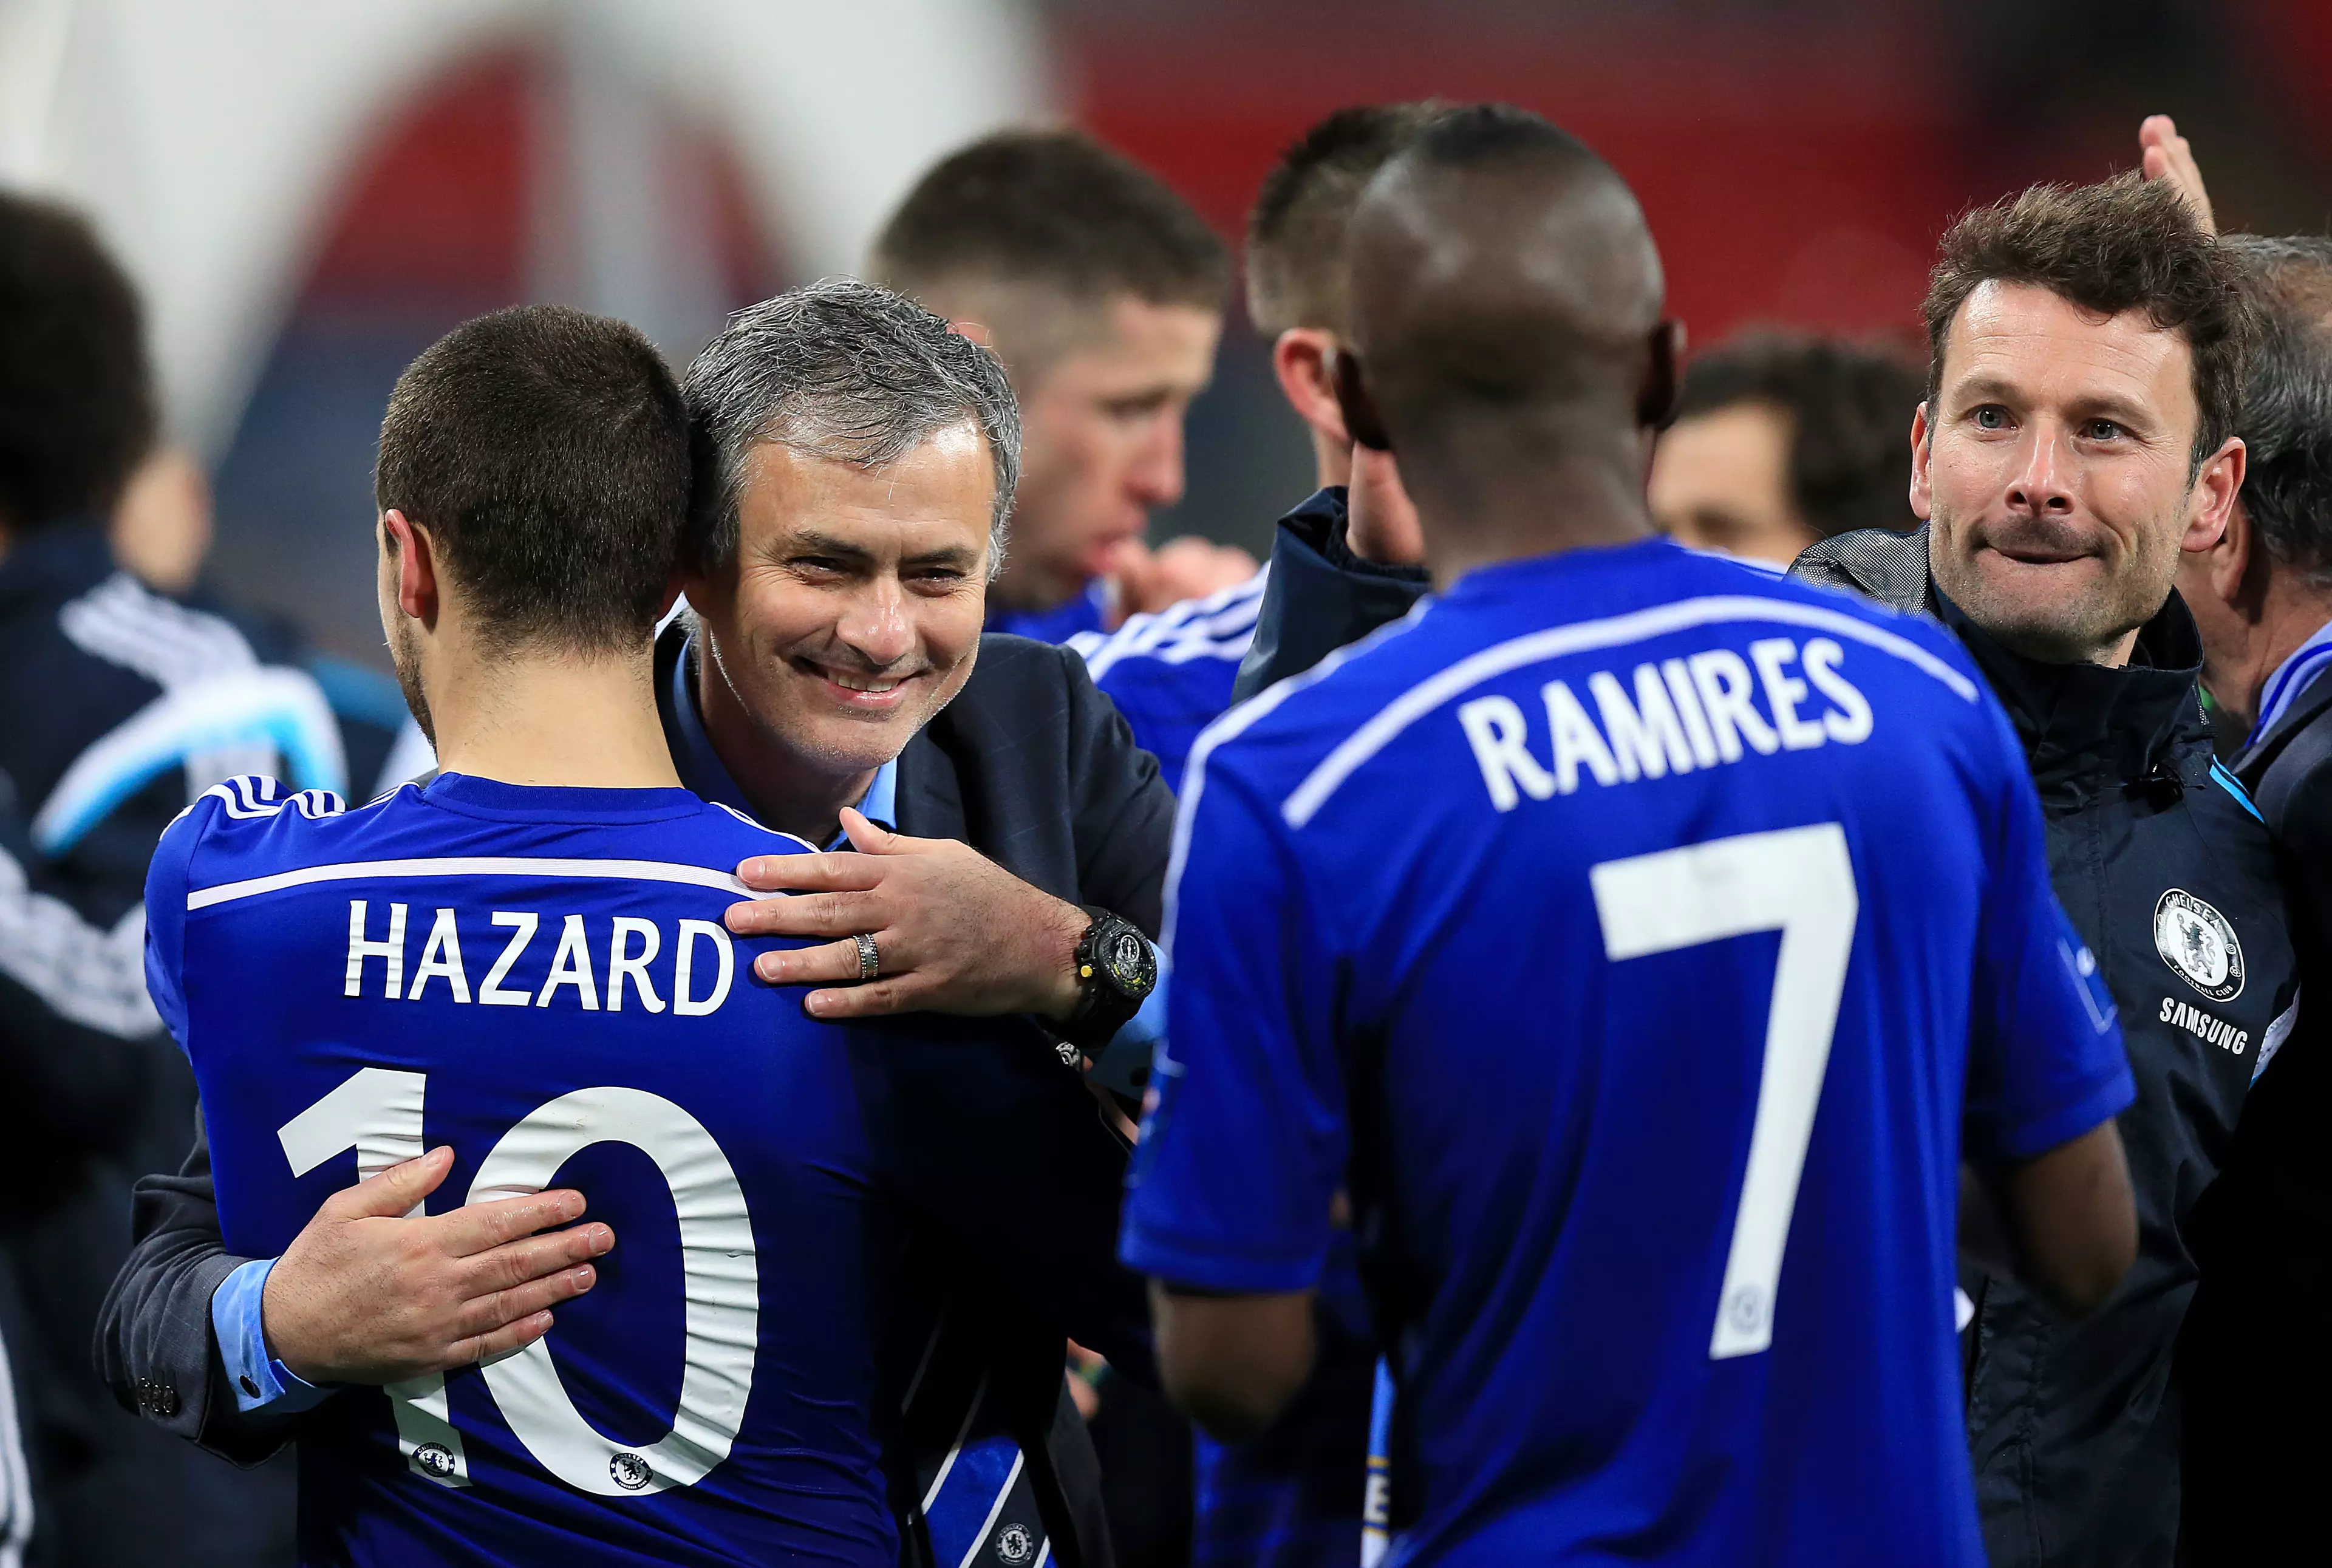 Mourinho hugs Hazard after winning the Capital One Cup. Image: PA Images